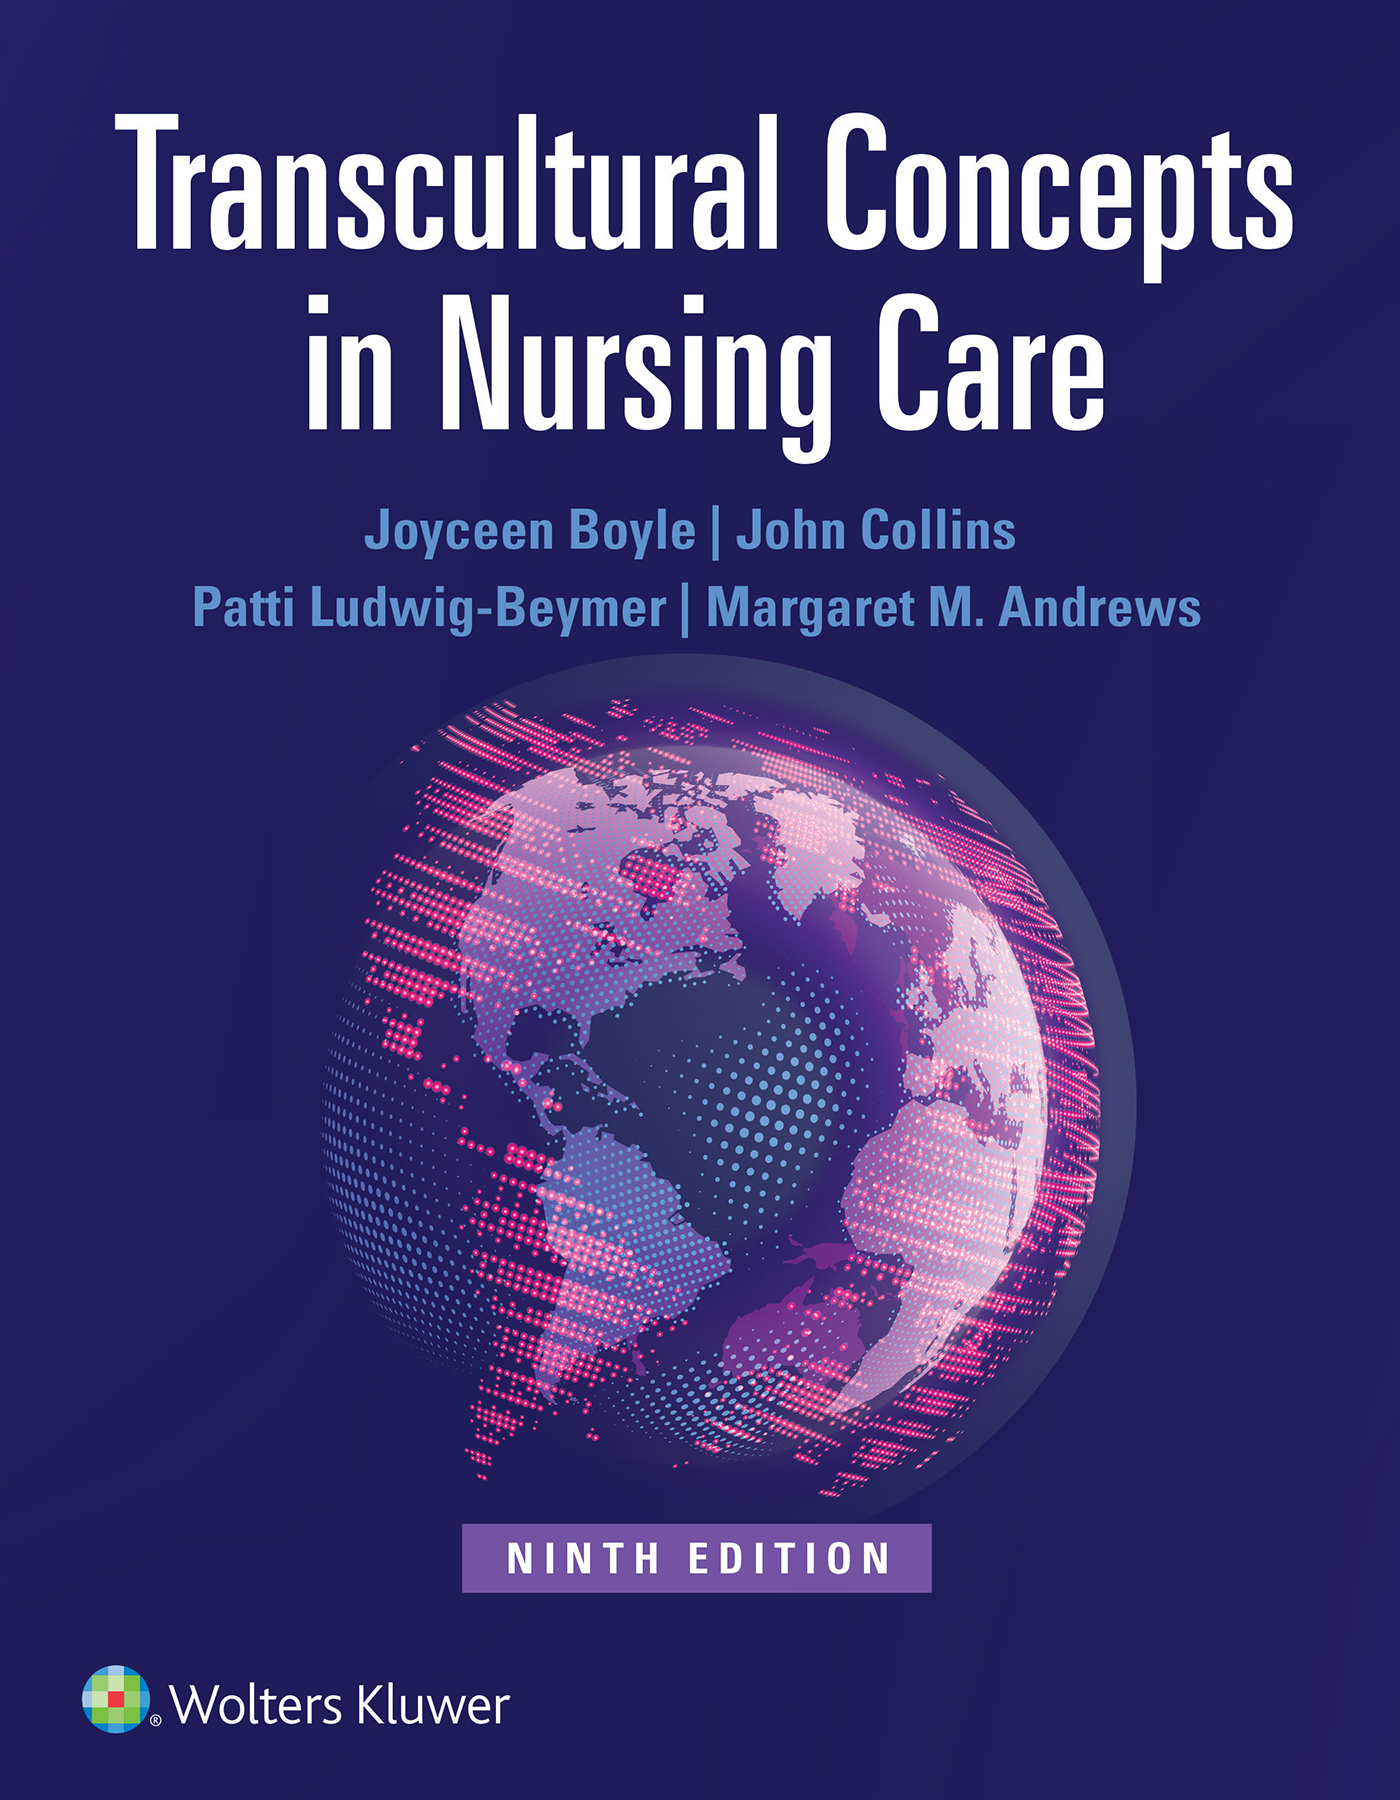 Transcultural Concepts in Nursing Care, 9th Edition